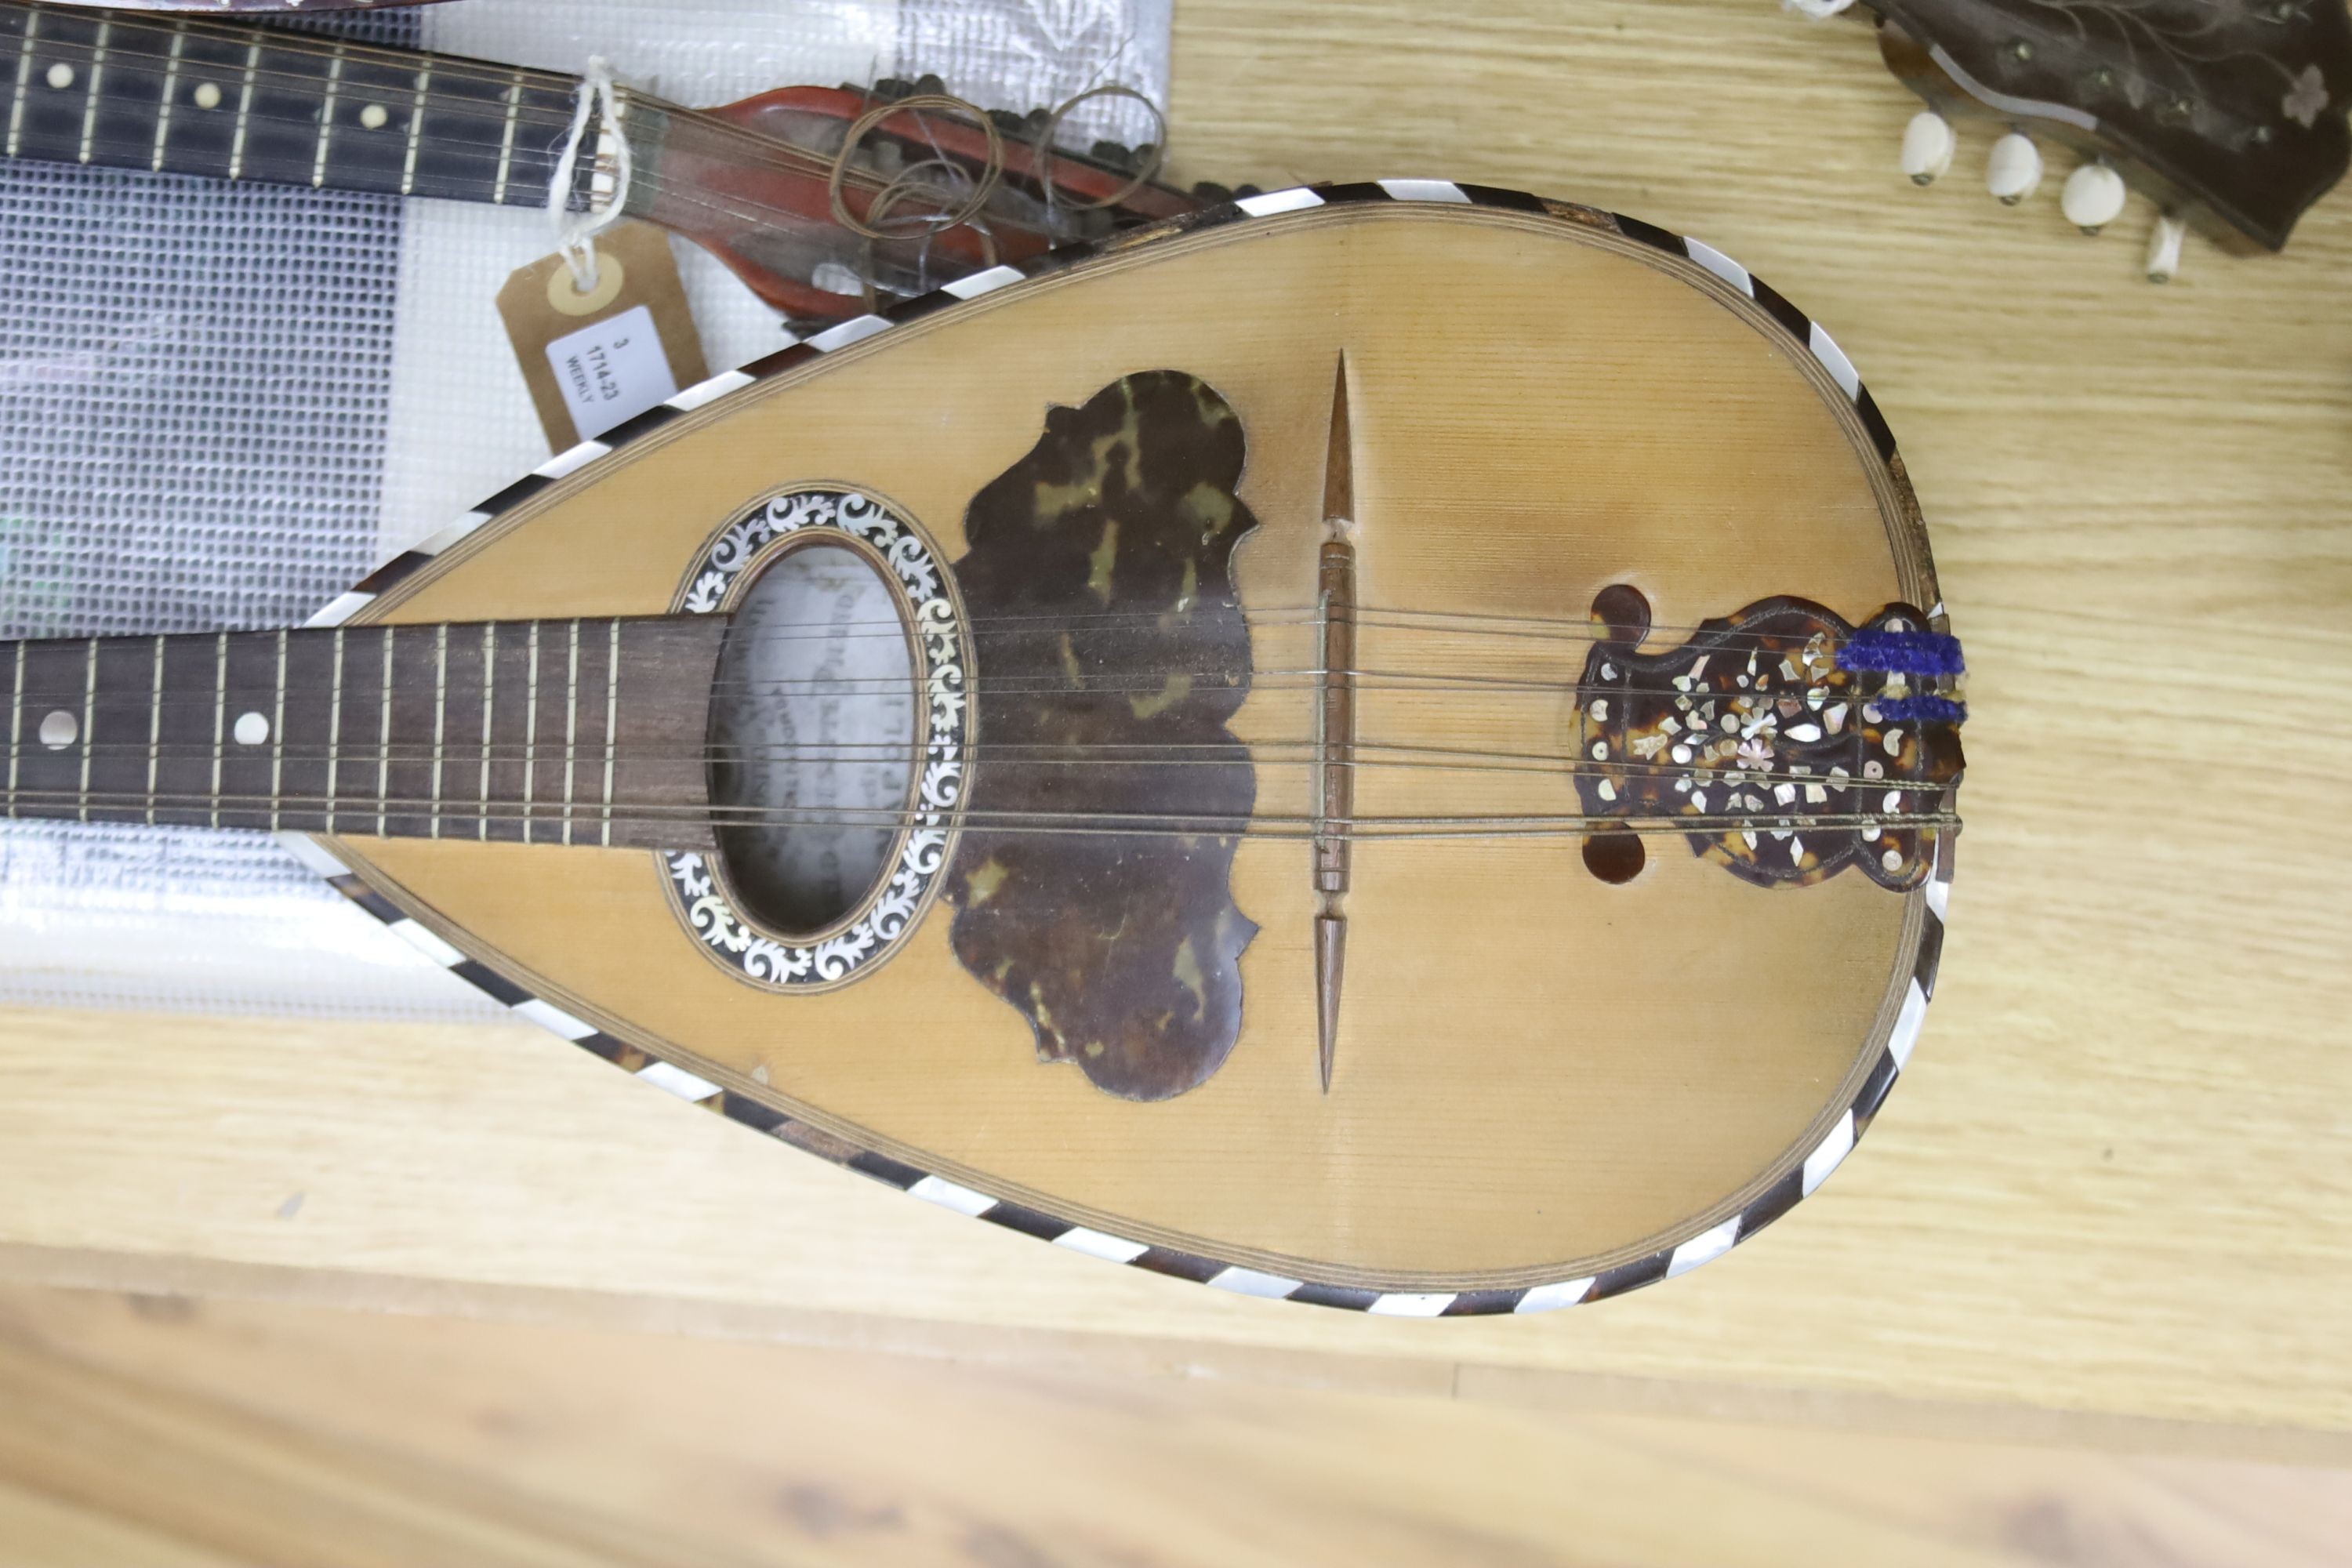 Three Neapolitan mandolins with inlaid mother of pearl decoration, one of round-backed form, the other two archtop